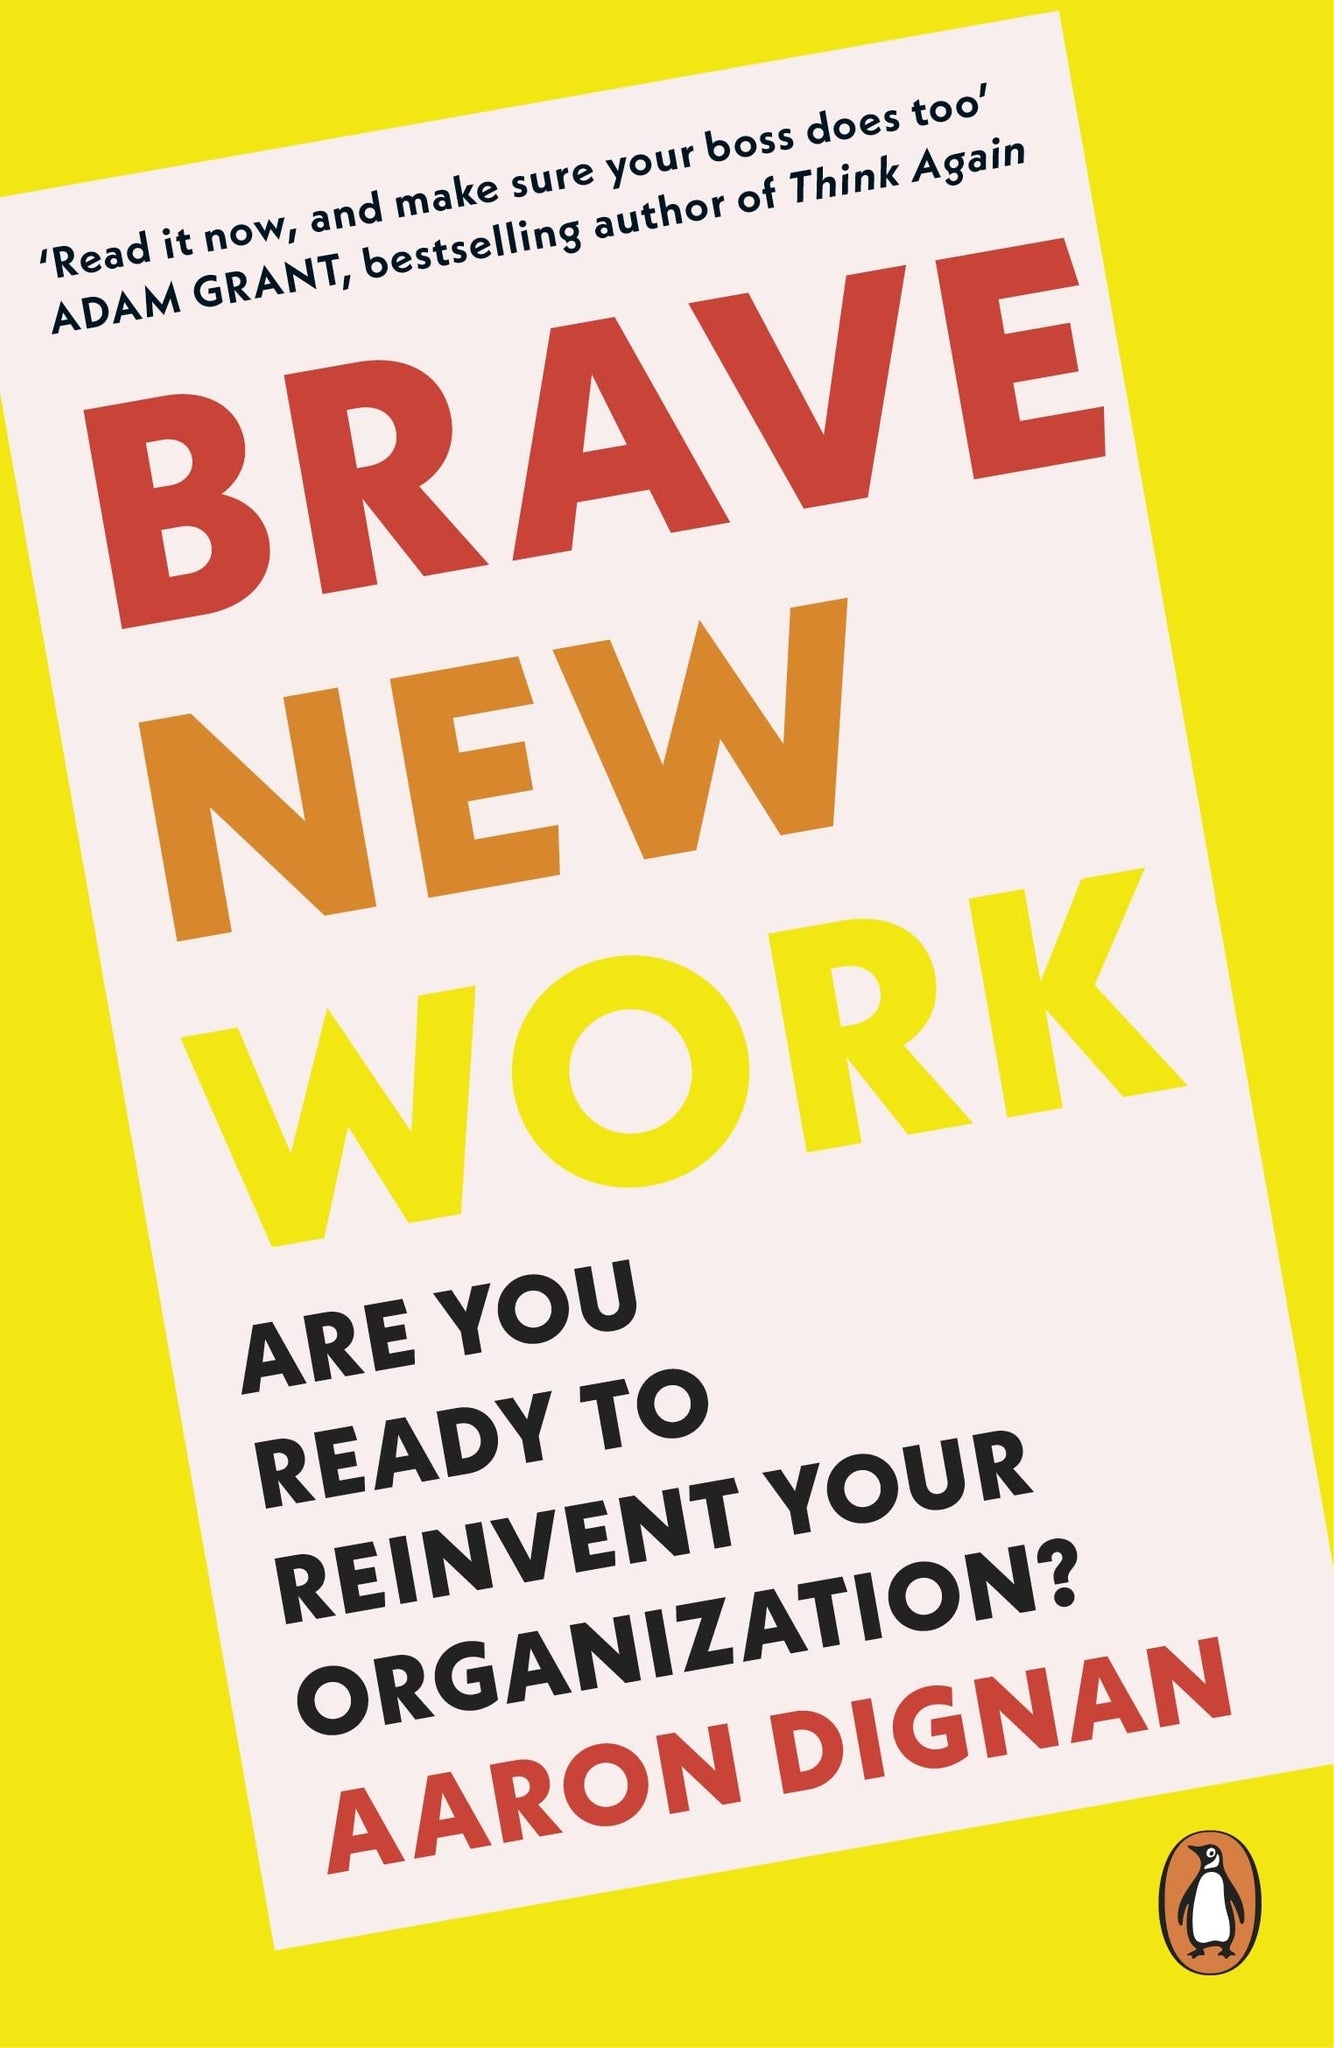 Brave New Work: Are You Ready To Reinvent Your Organization? - Paperback